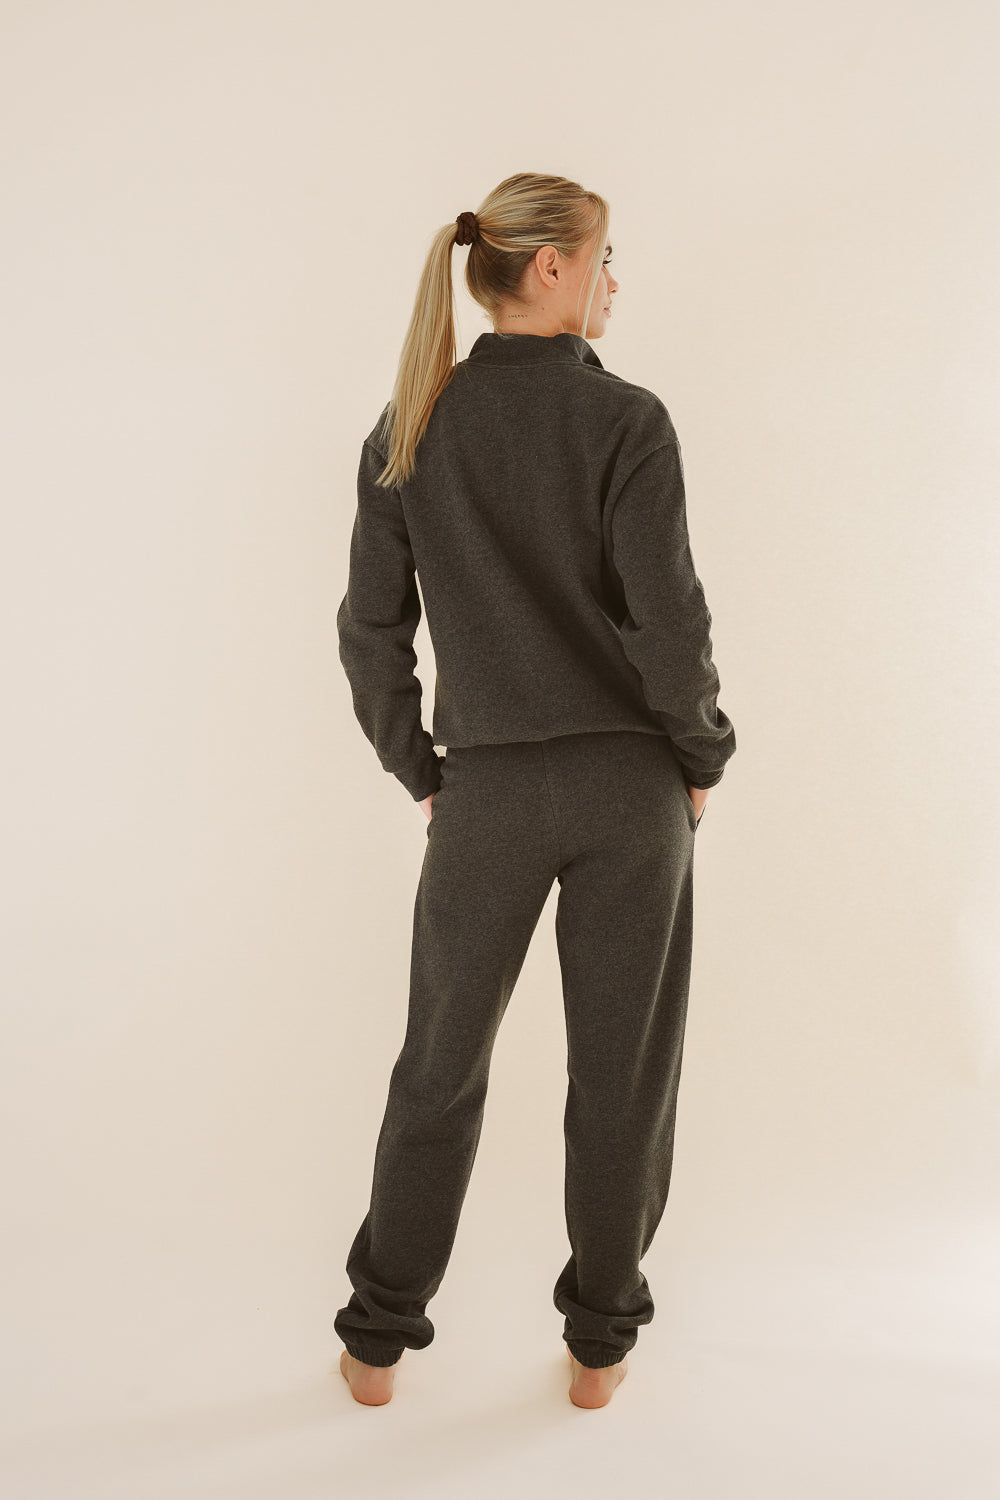 Dark grey AAMY jogging pants made from 100% organic cotton by Pura Clothing